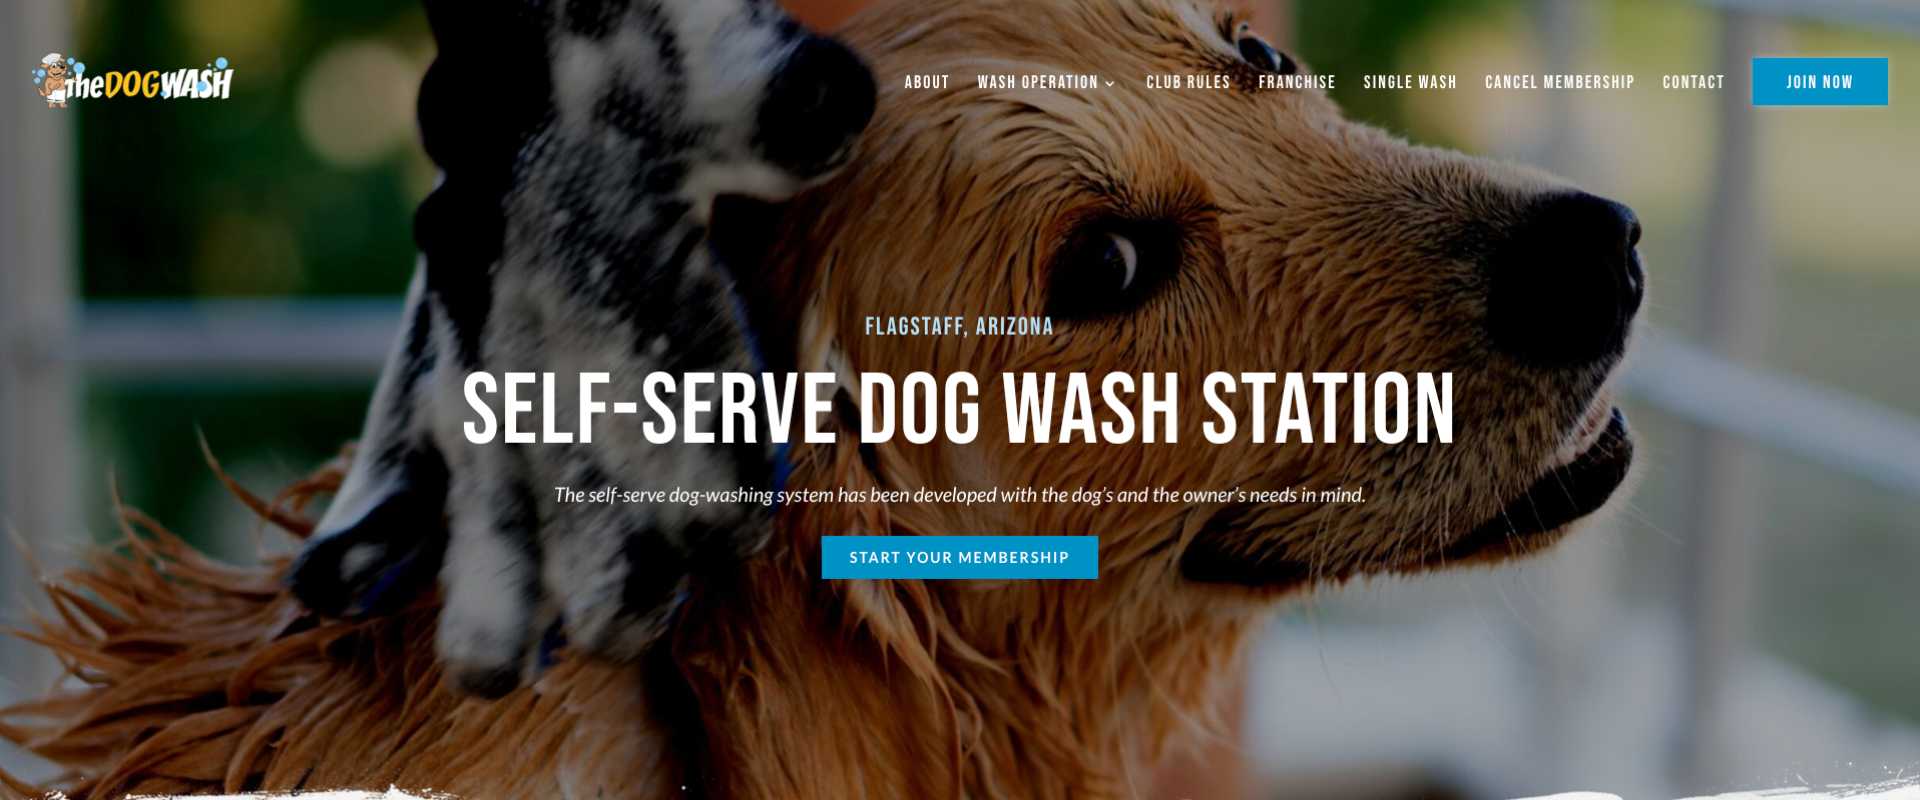 The Dog Wash Flagstaff new website home page